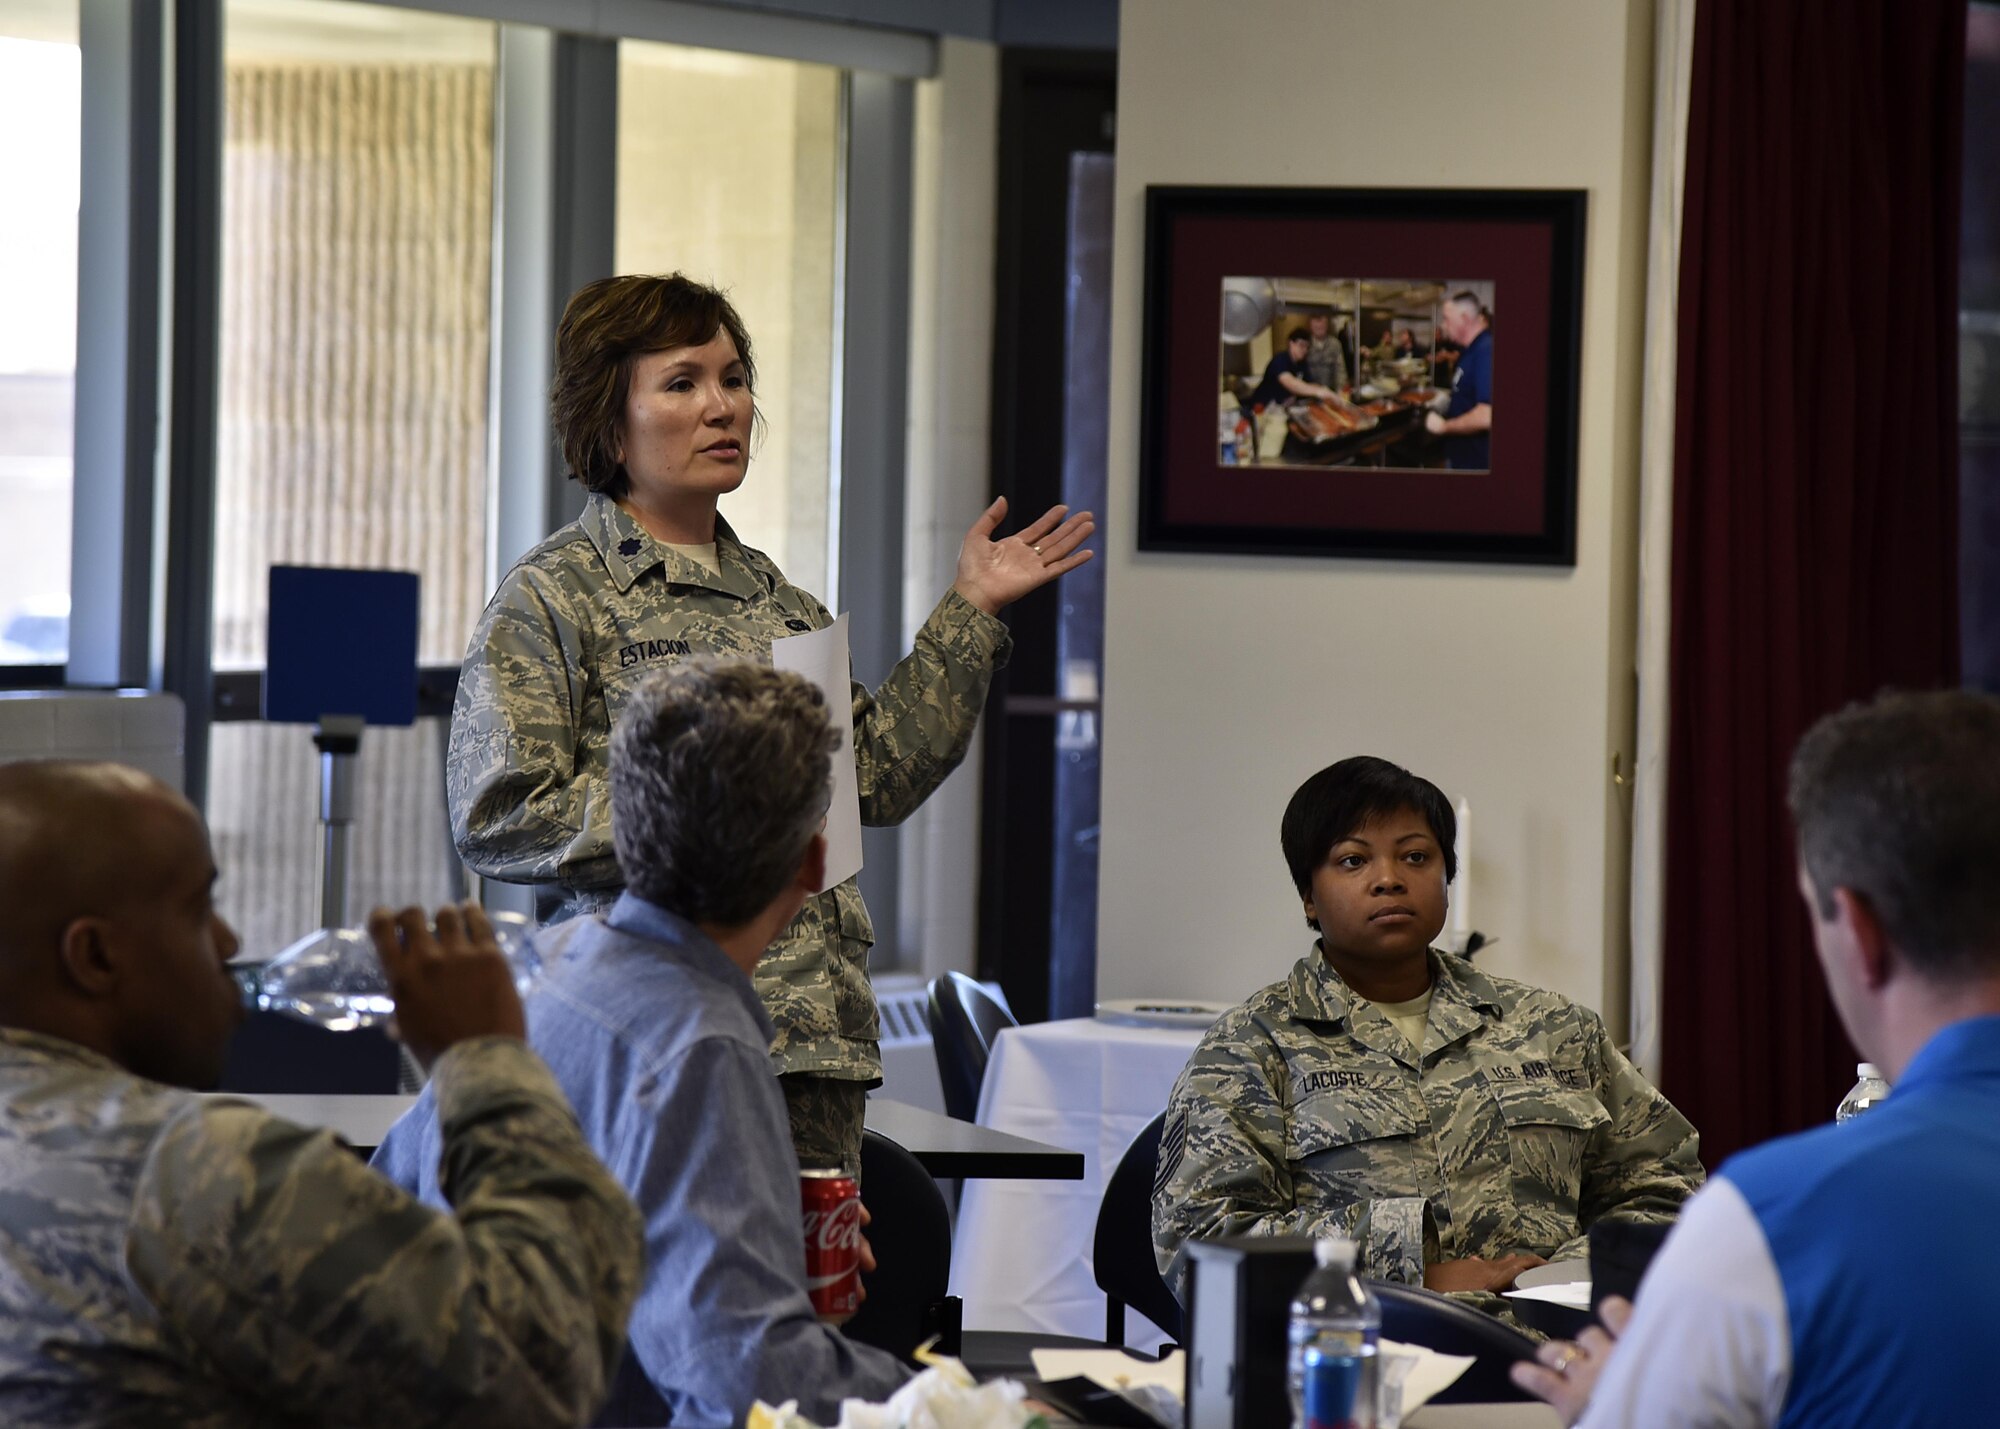 Air Force Lt. Col. Christine G. Estacion, medical service corps officer of 175th Medical Group, speaks to members of the Office of Cost Assessment and Program Evaluation June 1, 2017, in the dining facility at Warfield Air National Guard Base, Md. Estacion was answering CAPE member questions during a working lunch. (U.S. Air National Guard photo by Airman Sarah M. McClanahan /Released Master Sgt. Chris Schepers)